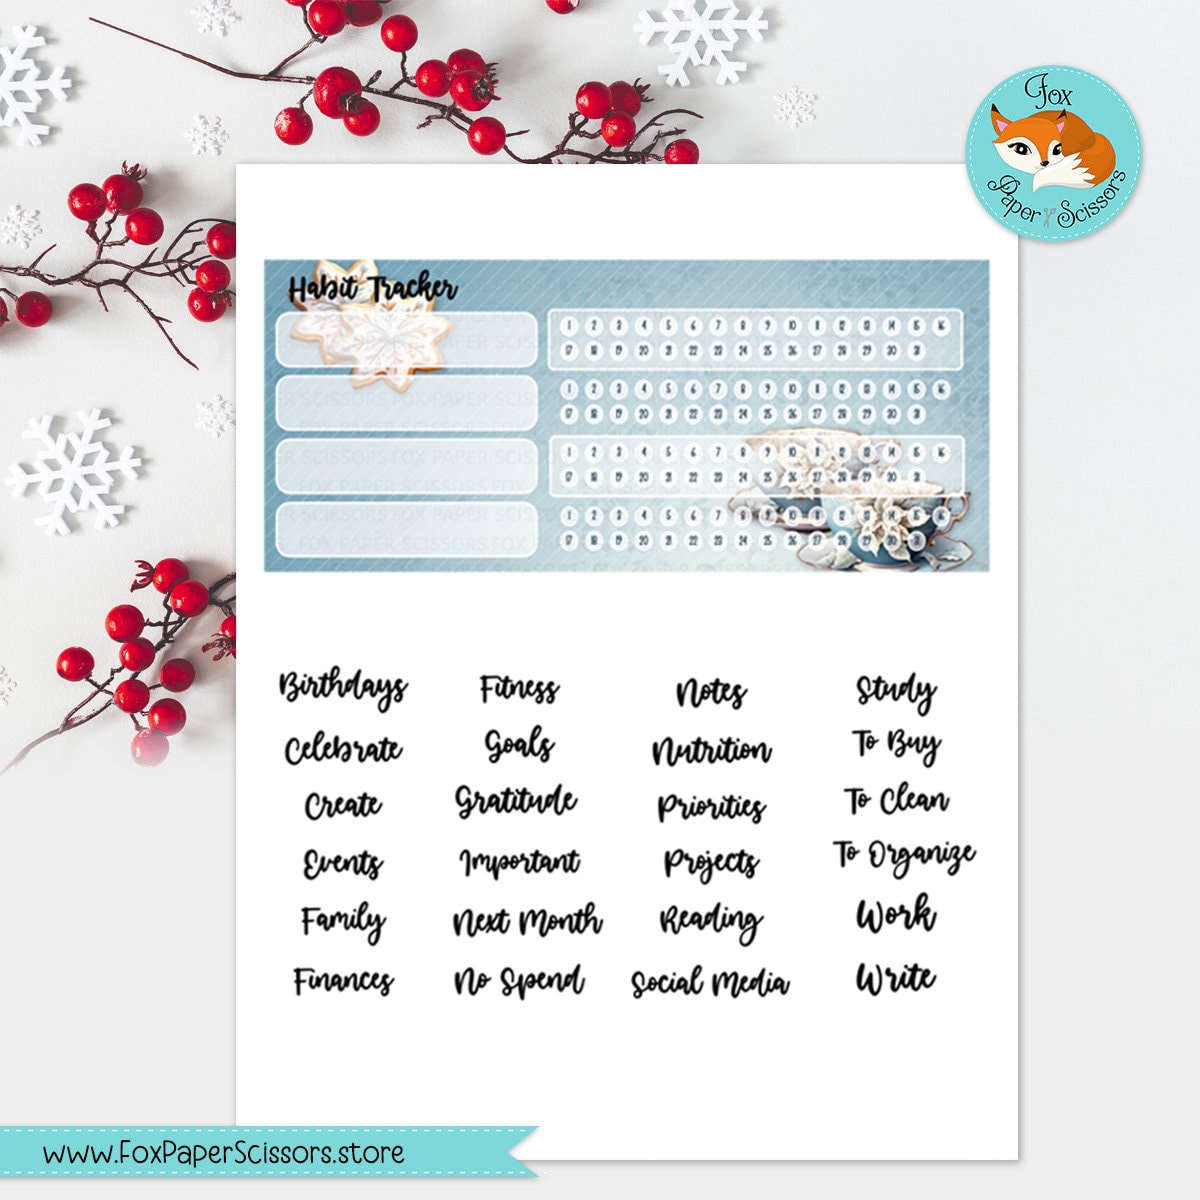 printable monthly dashboard, planner dashboard,monthly dashboard,dashboard, planner,sticker,erin condren,ec,ecvl, digital,download,cricut,print and cut, vertical,layout,7x9,winter,december, january,snow,tea,teacup, february, flower,floral,white, blue